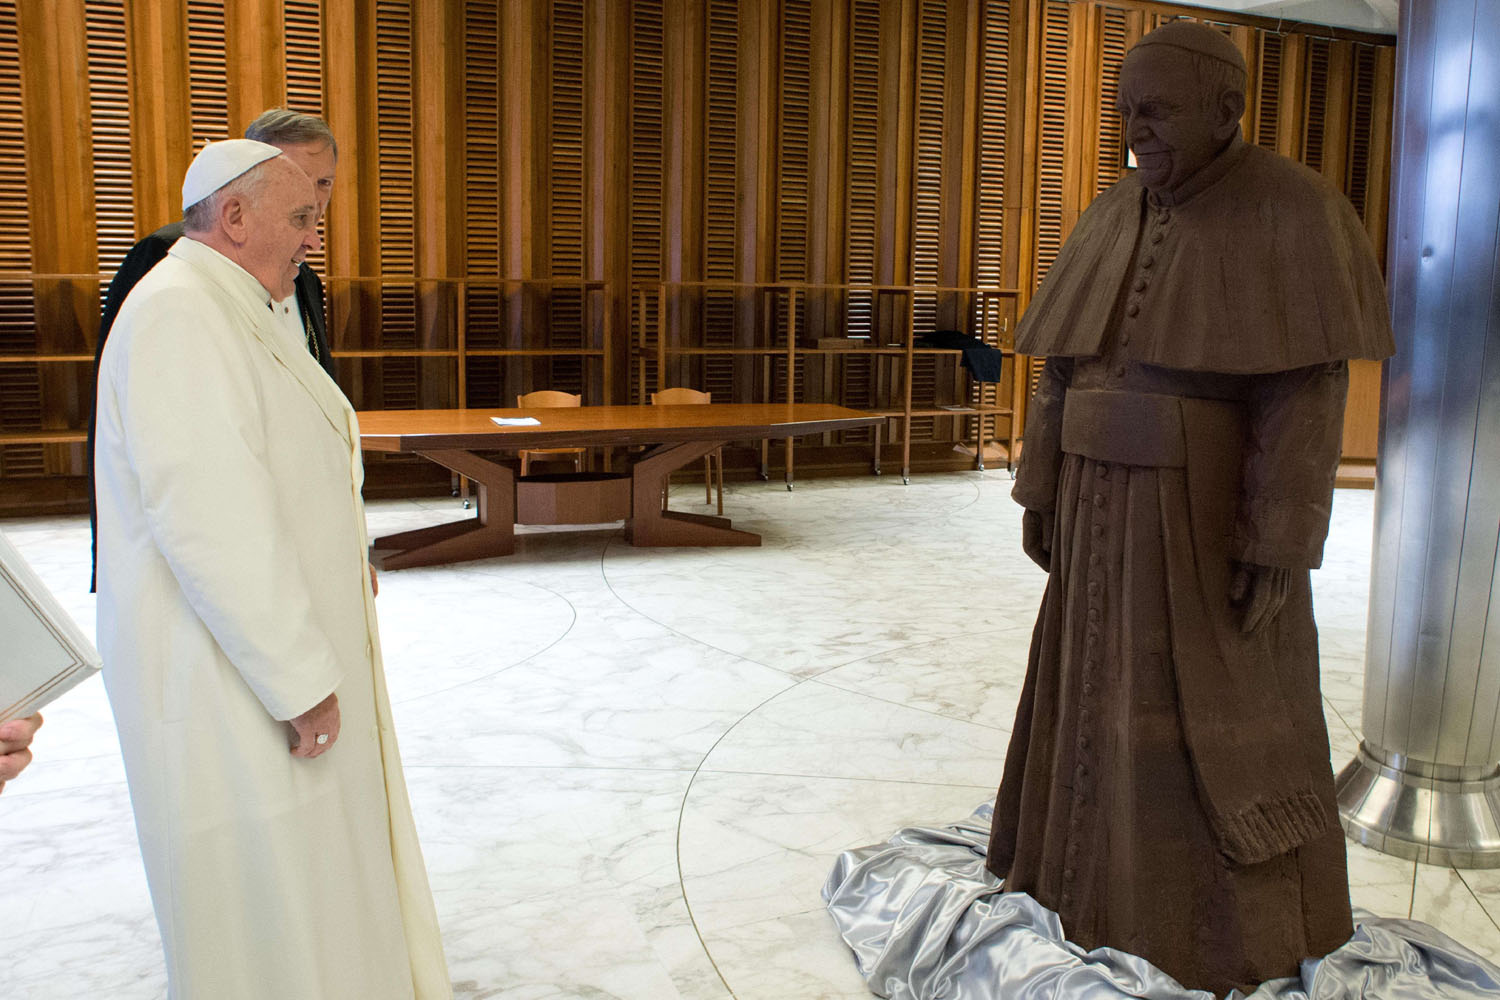 Pope Francis looks at a chocolate statue of himself, given to him after his weekly audience, on Feb. 5, 2014. (Osservatore Romano&amp;mdash;AFP/Getty Images)